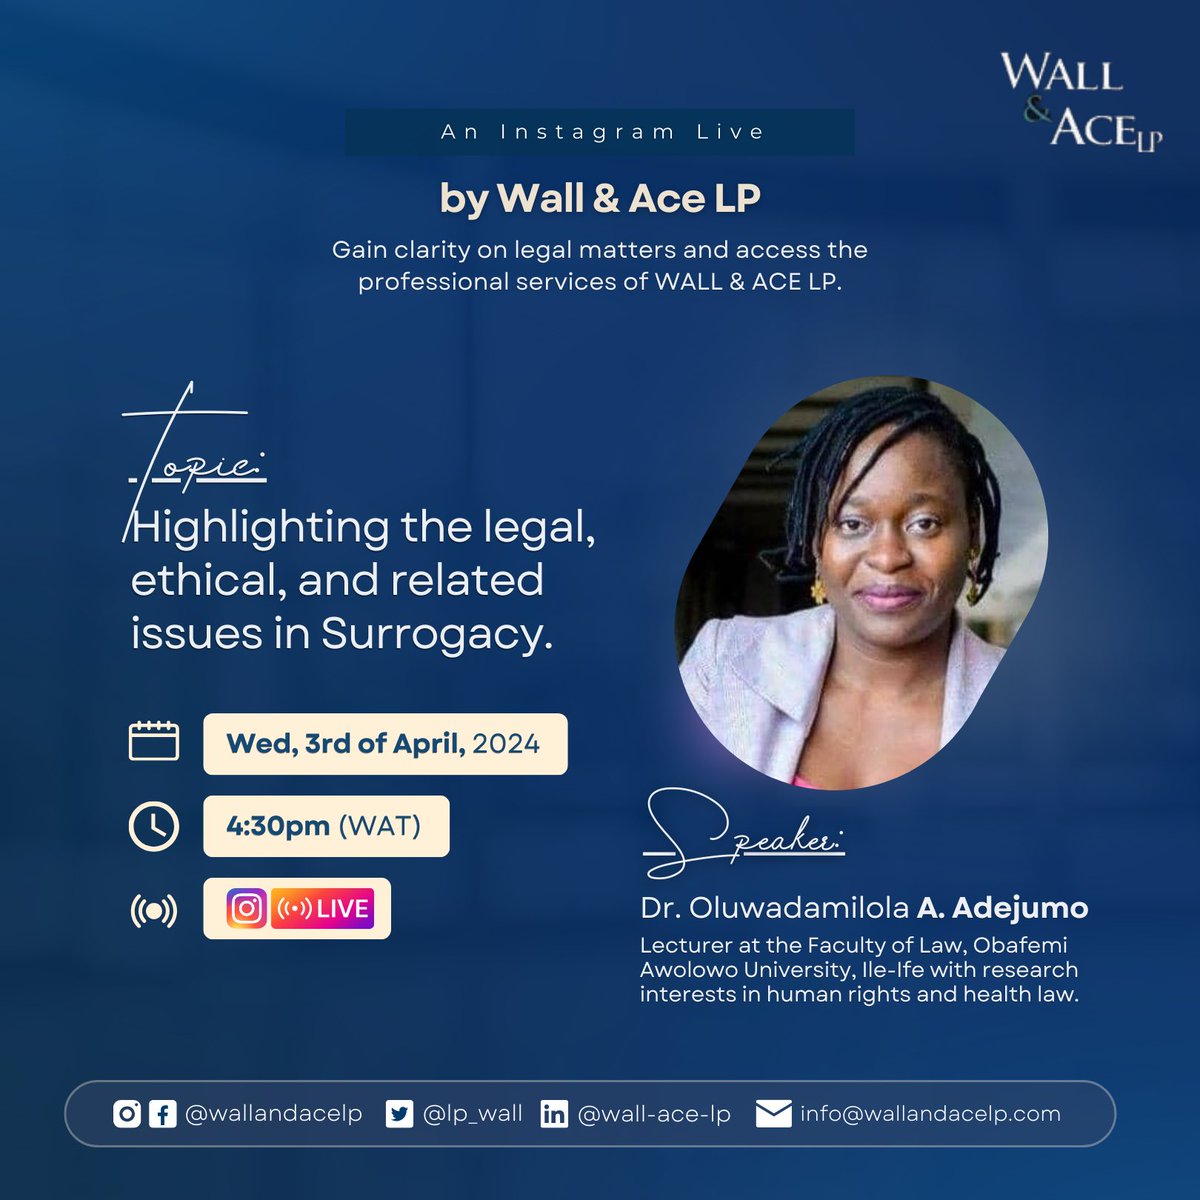 📢 Calling all legal eagles and healthcare pros! 📢 Join us for an enlightening discussion on Surrogacy's legal and ethical dimensions with Dr. Oluwadamilola A. Adejumo. 🗓️ Date: 3rd April, 2024 ⏰ Time: 4:30pm 🎙️ #Surrogacy #LegalEthics #HealthcareLaw #TwitterChat